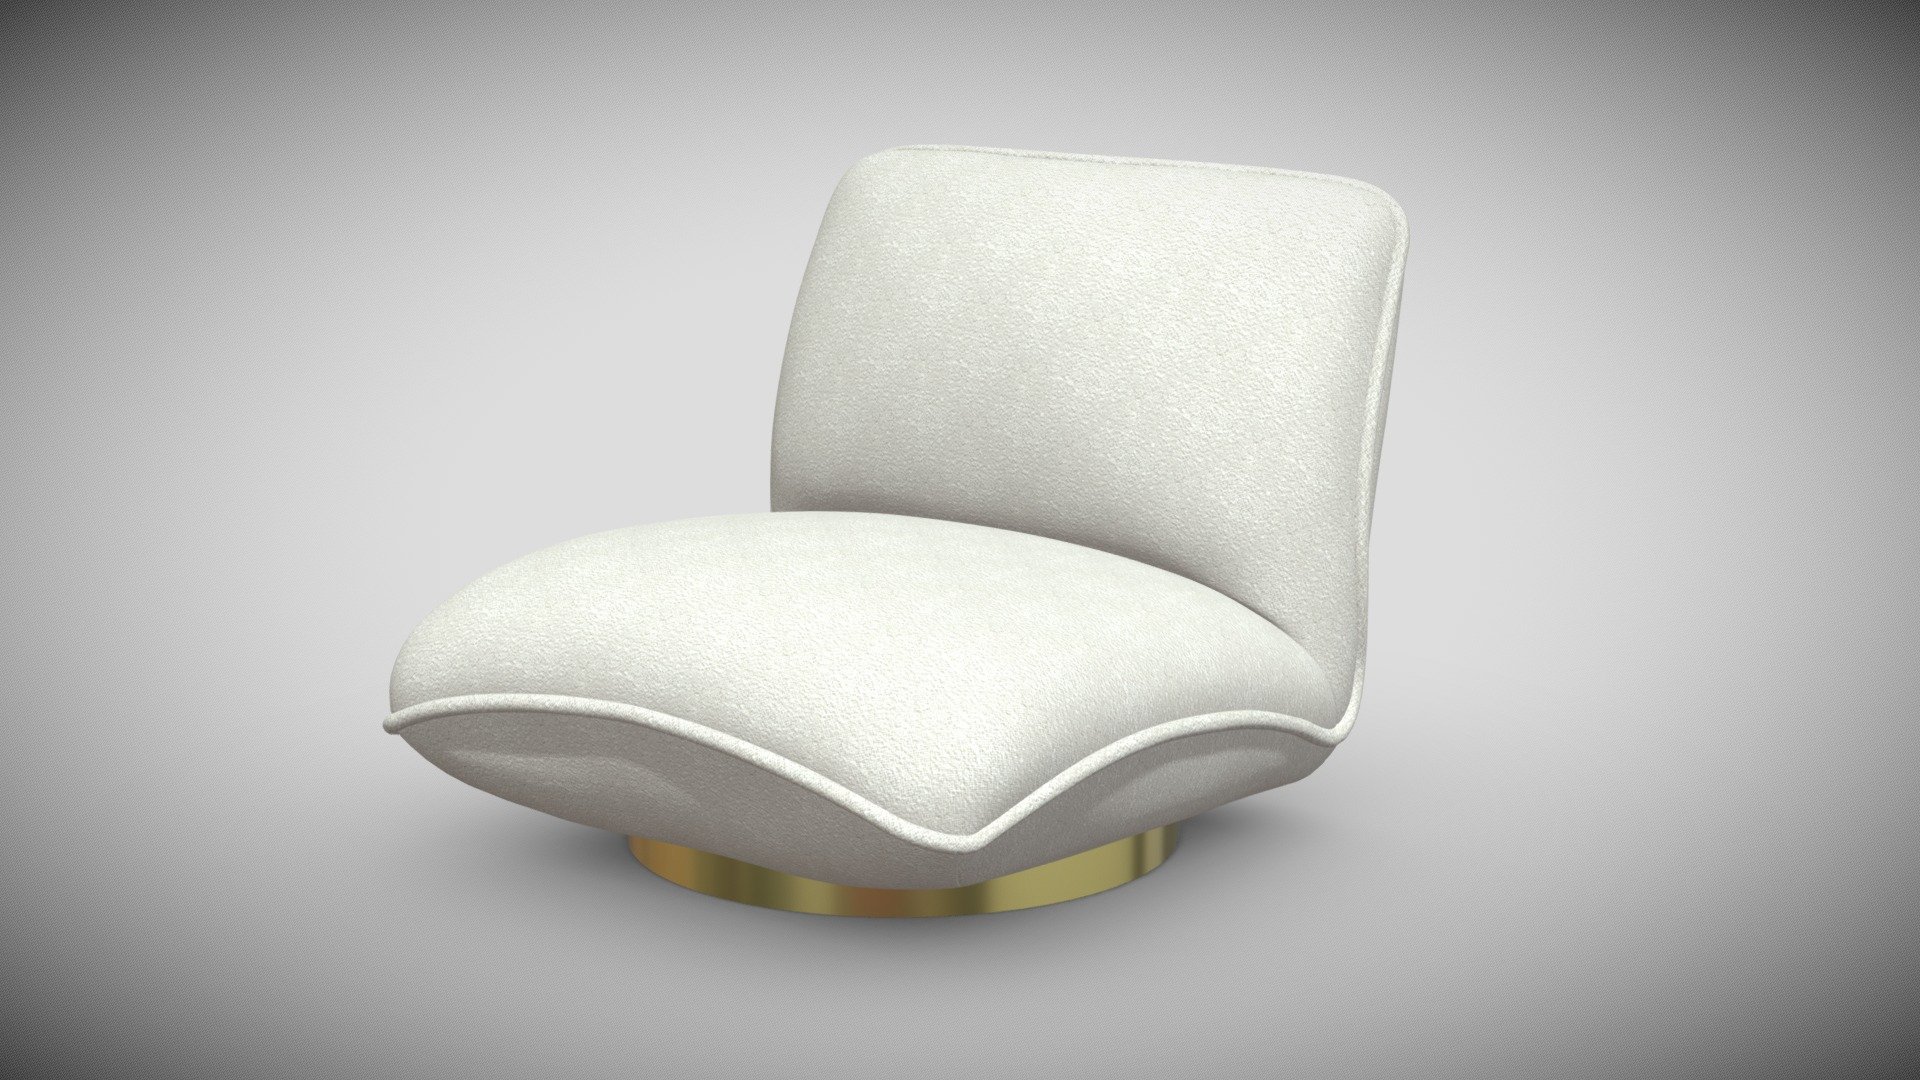 Bouclé cream | brushed brass finish swivel base

Dimensions: cm    

Width 85,5
Depth 105
Height 71

It is the high-quality hi-poly smoothable 3D model relax chair used in various fields 3D Graphics such as: game development, advertising, interior design, motion picture art, visualization, etc..


   All details of design are recreated most authentically.

   The competently think over topology of model allows to using any smoothing modifiers. All parts of the model need to smooth in subdivision level 1 or 2 for the best result.

   Polygon count 23310. vertex 23335

z
all textures in archive file

Rate to let others know about the quality!
To check out my other models you just need to click on my user name 3d model